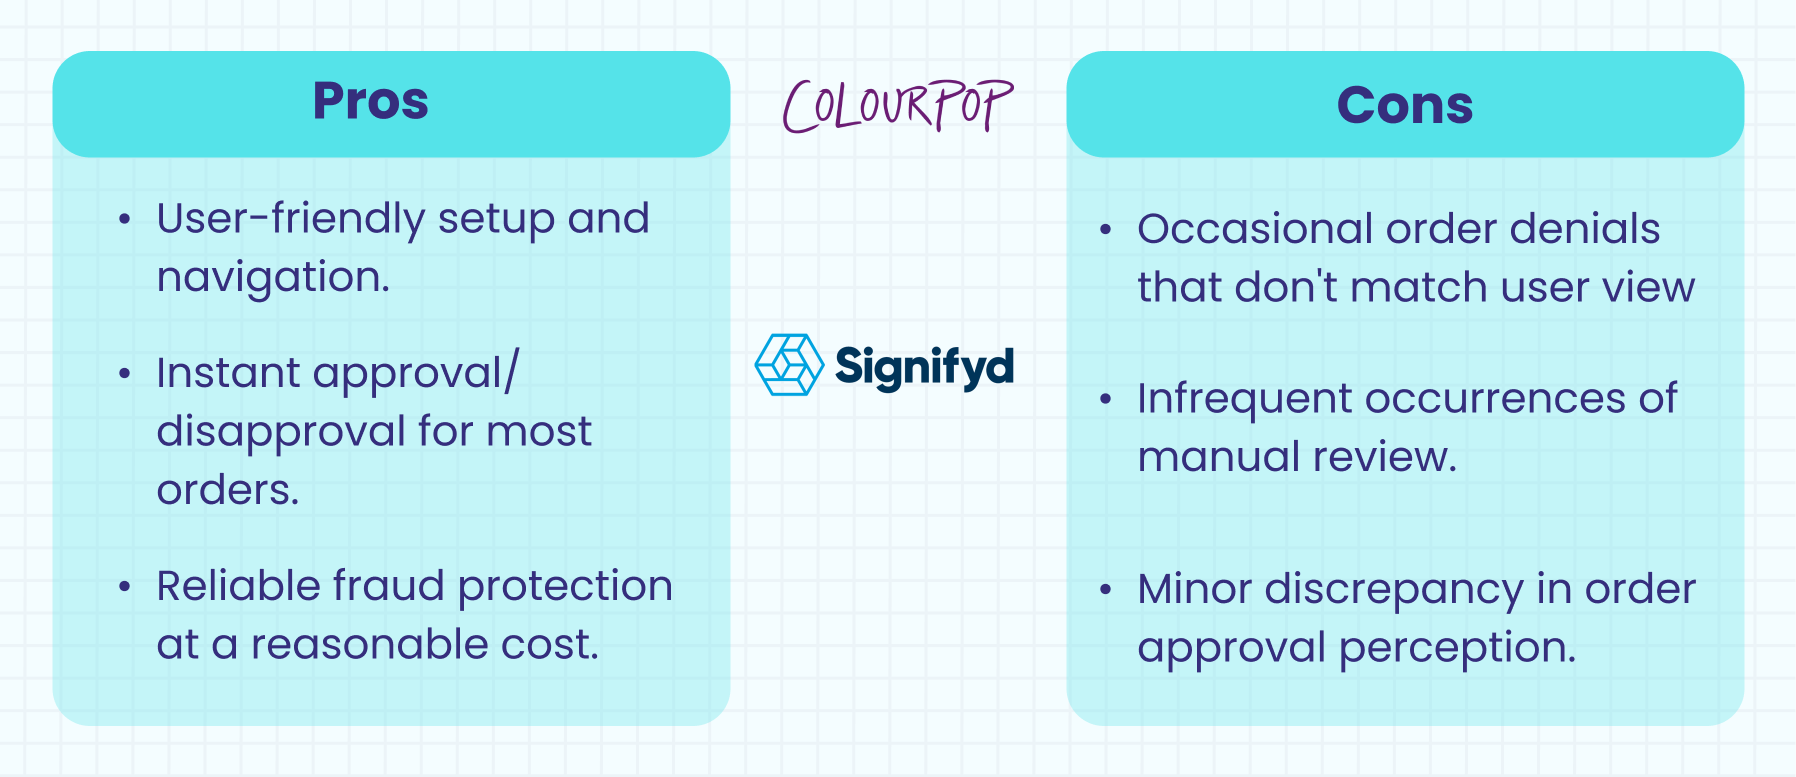 Pros and cons of Signifyd